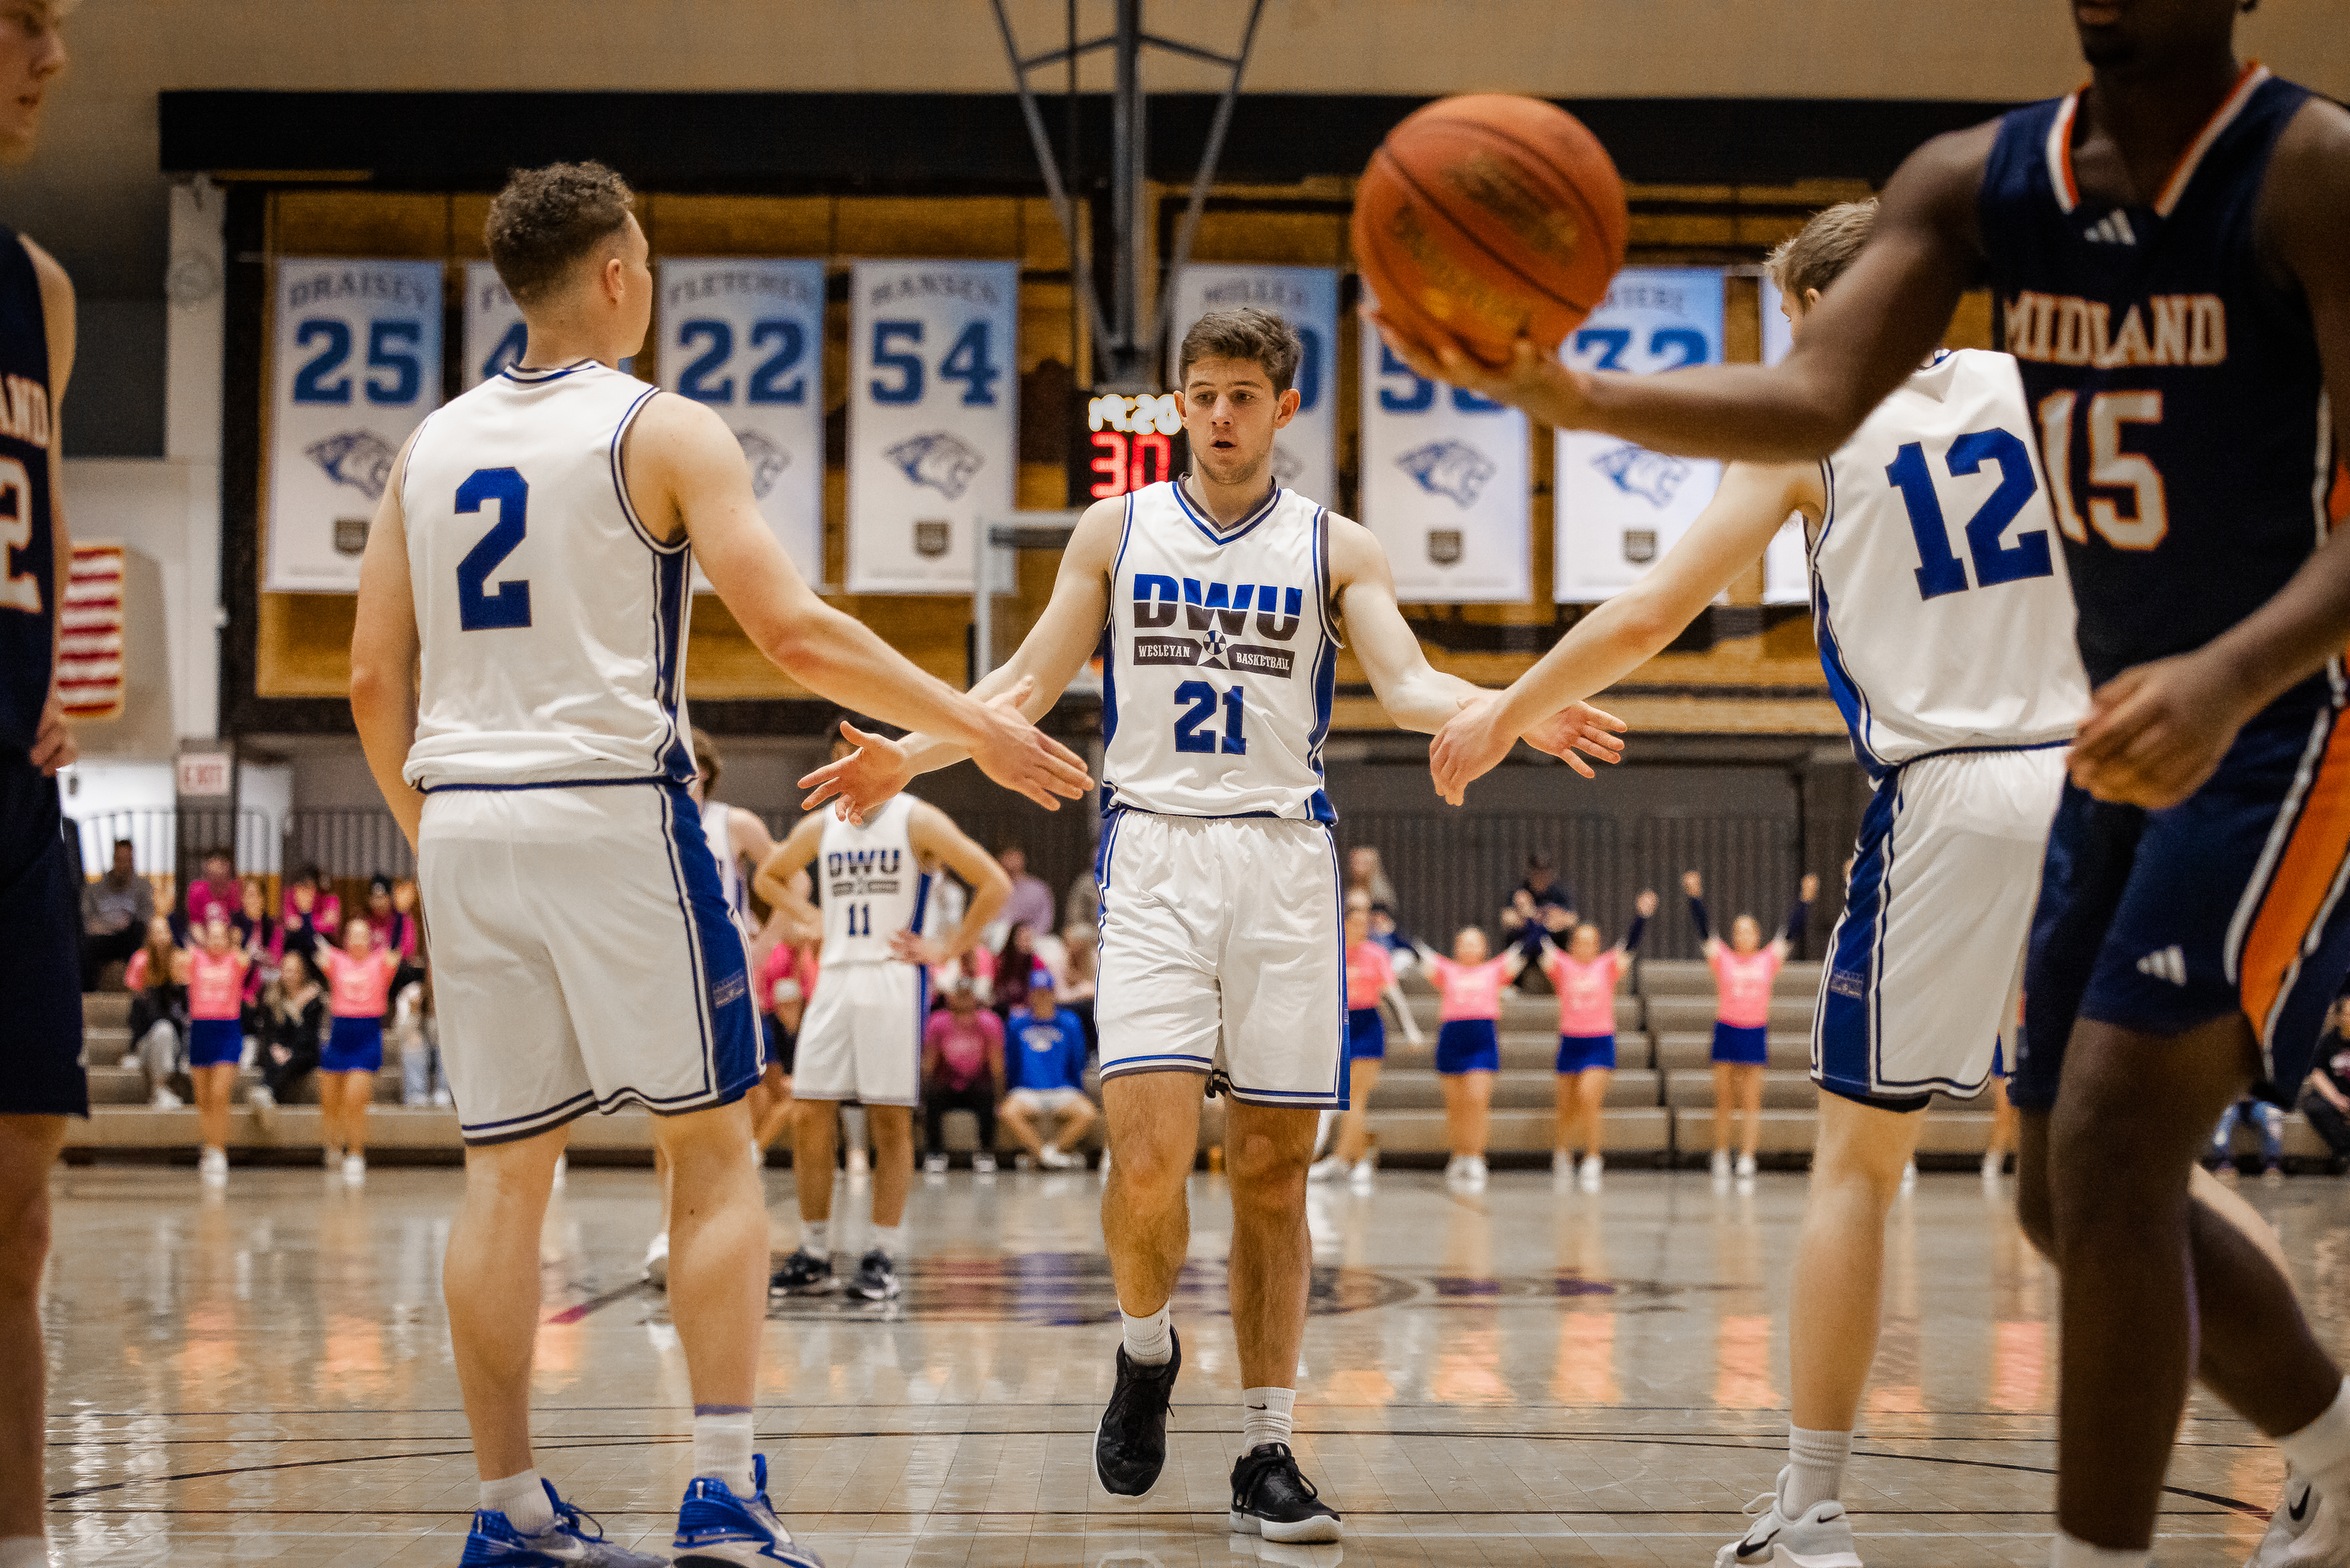 DAKOTA WESLEYAN BEATS OUT DOANE IN SECOND ROUND OF BATTLE OF THE TIGERS, WIN 79-70